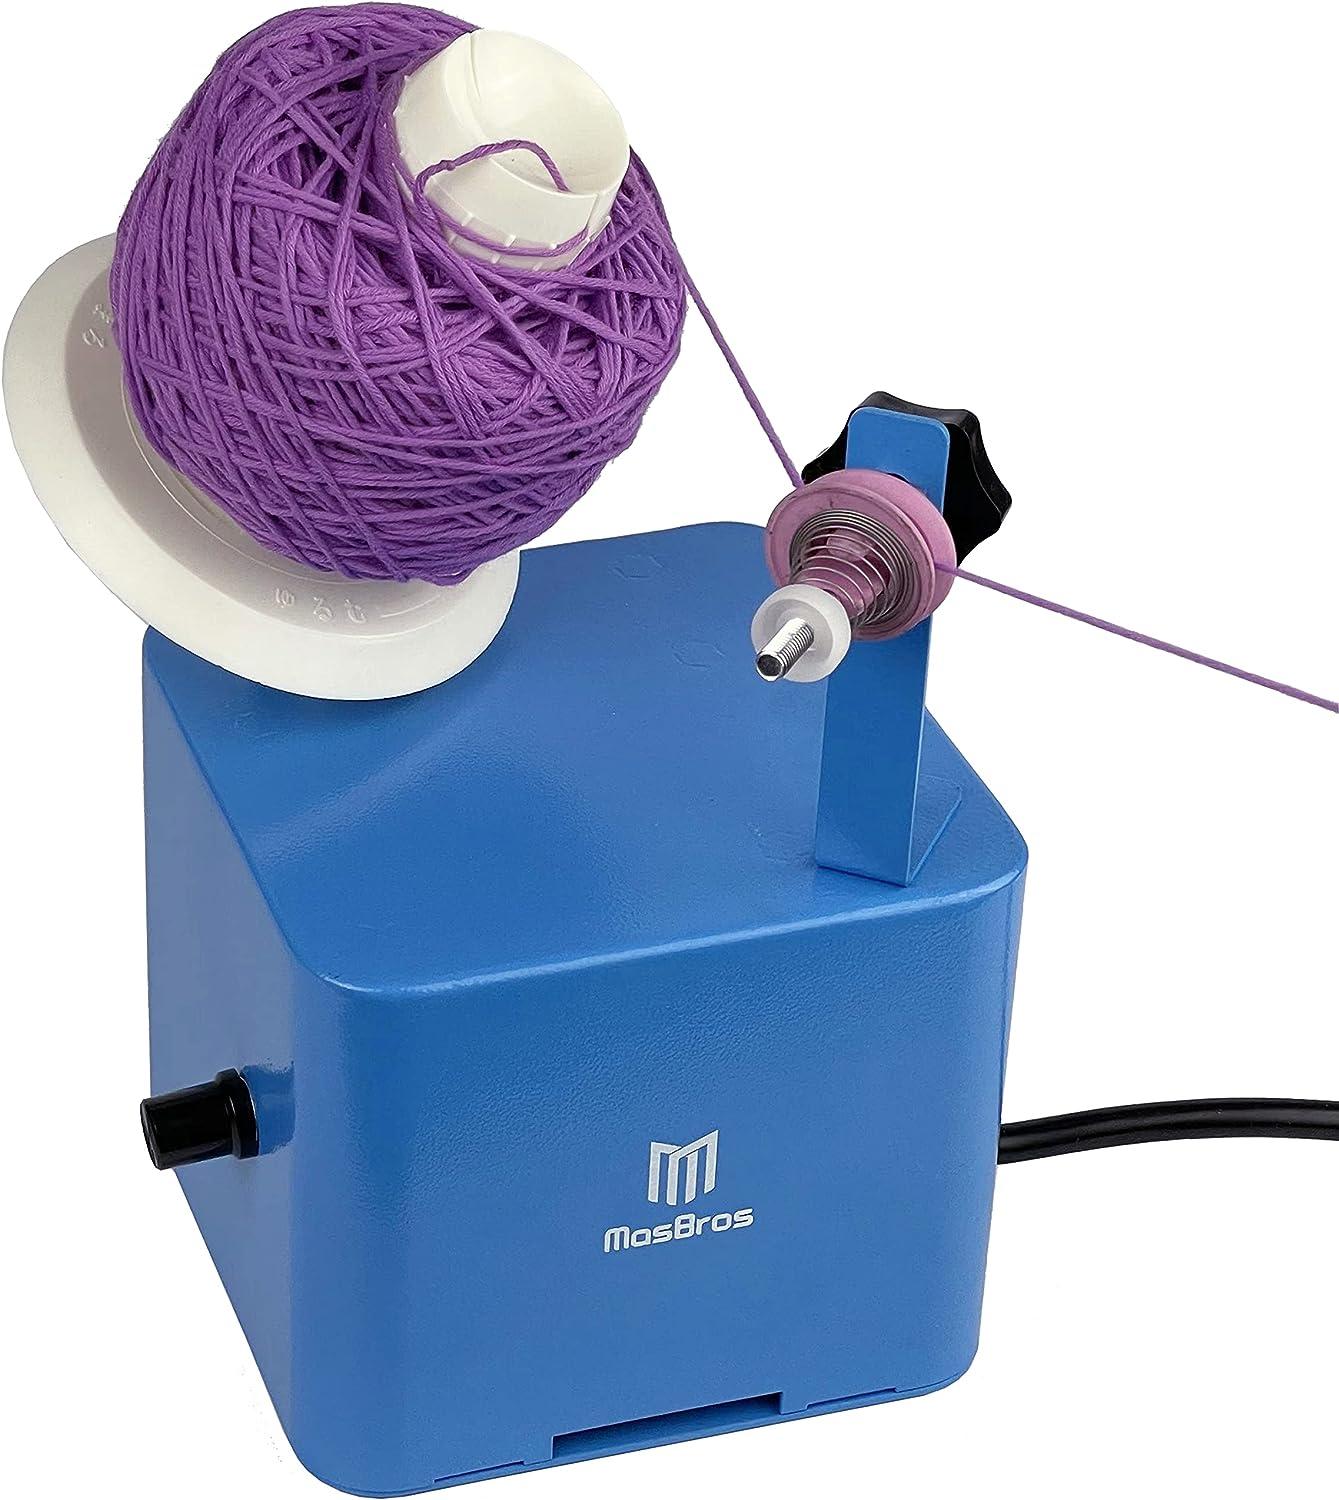 MasBros Yarn Ball Winder Skein Spinner with Precise Guiding Arm 